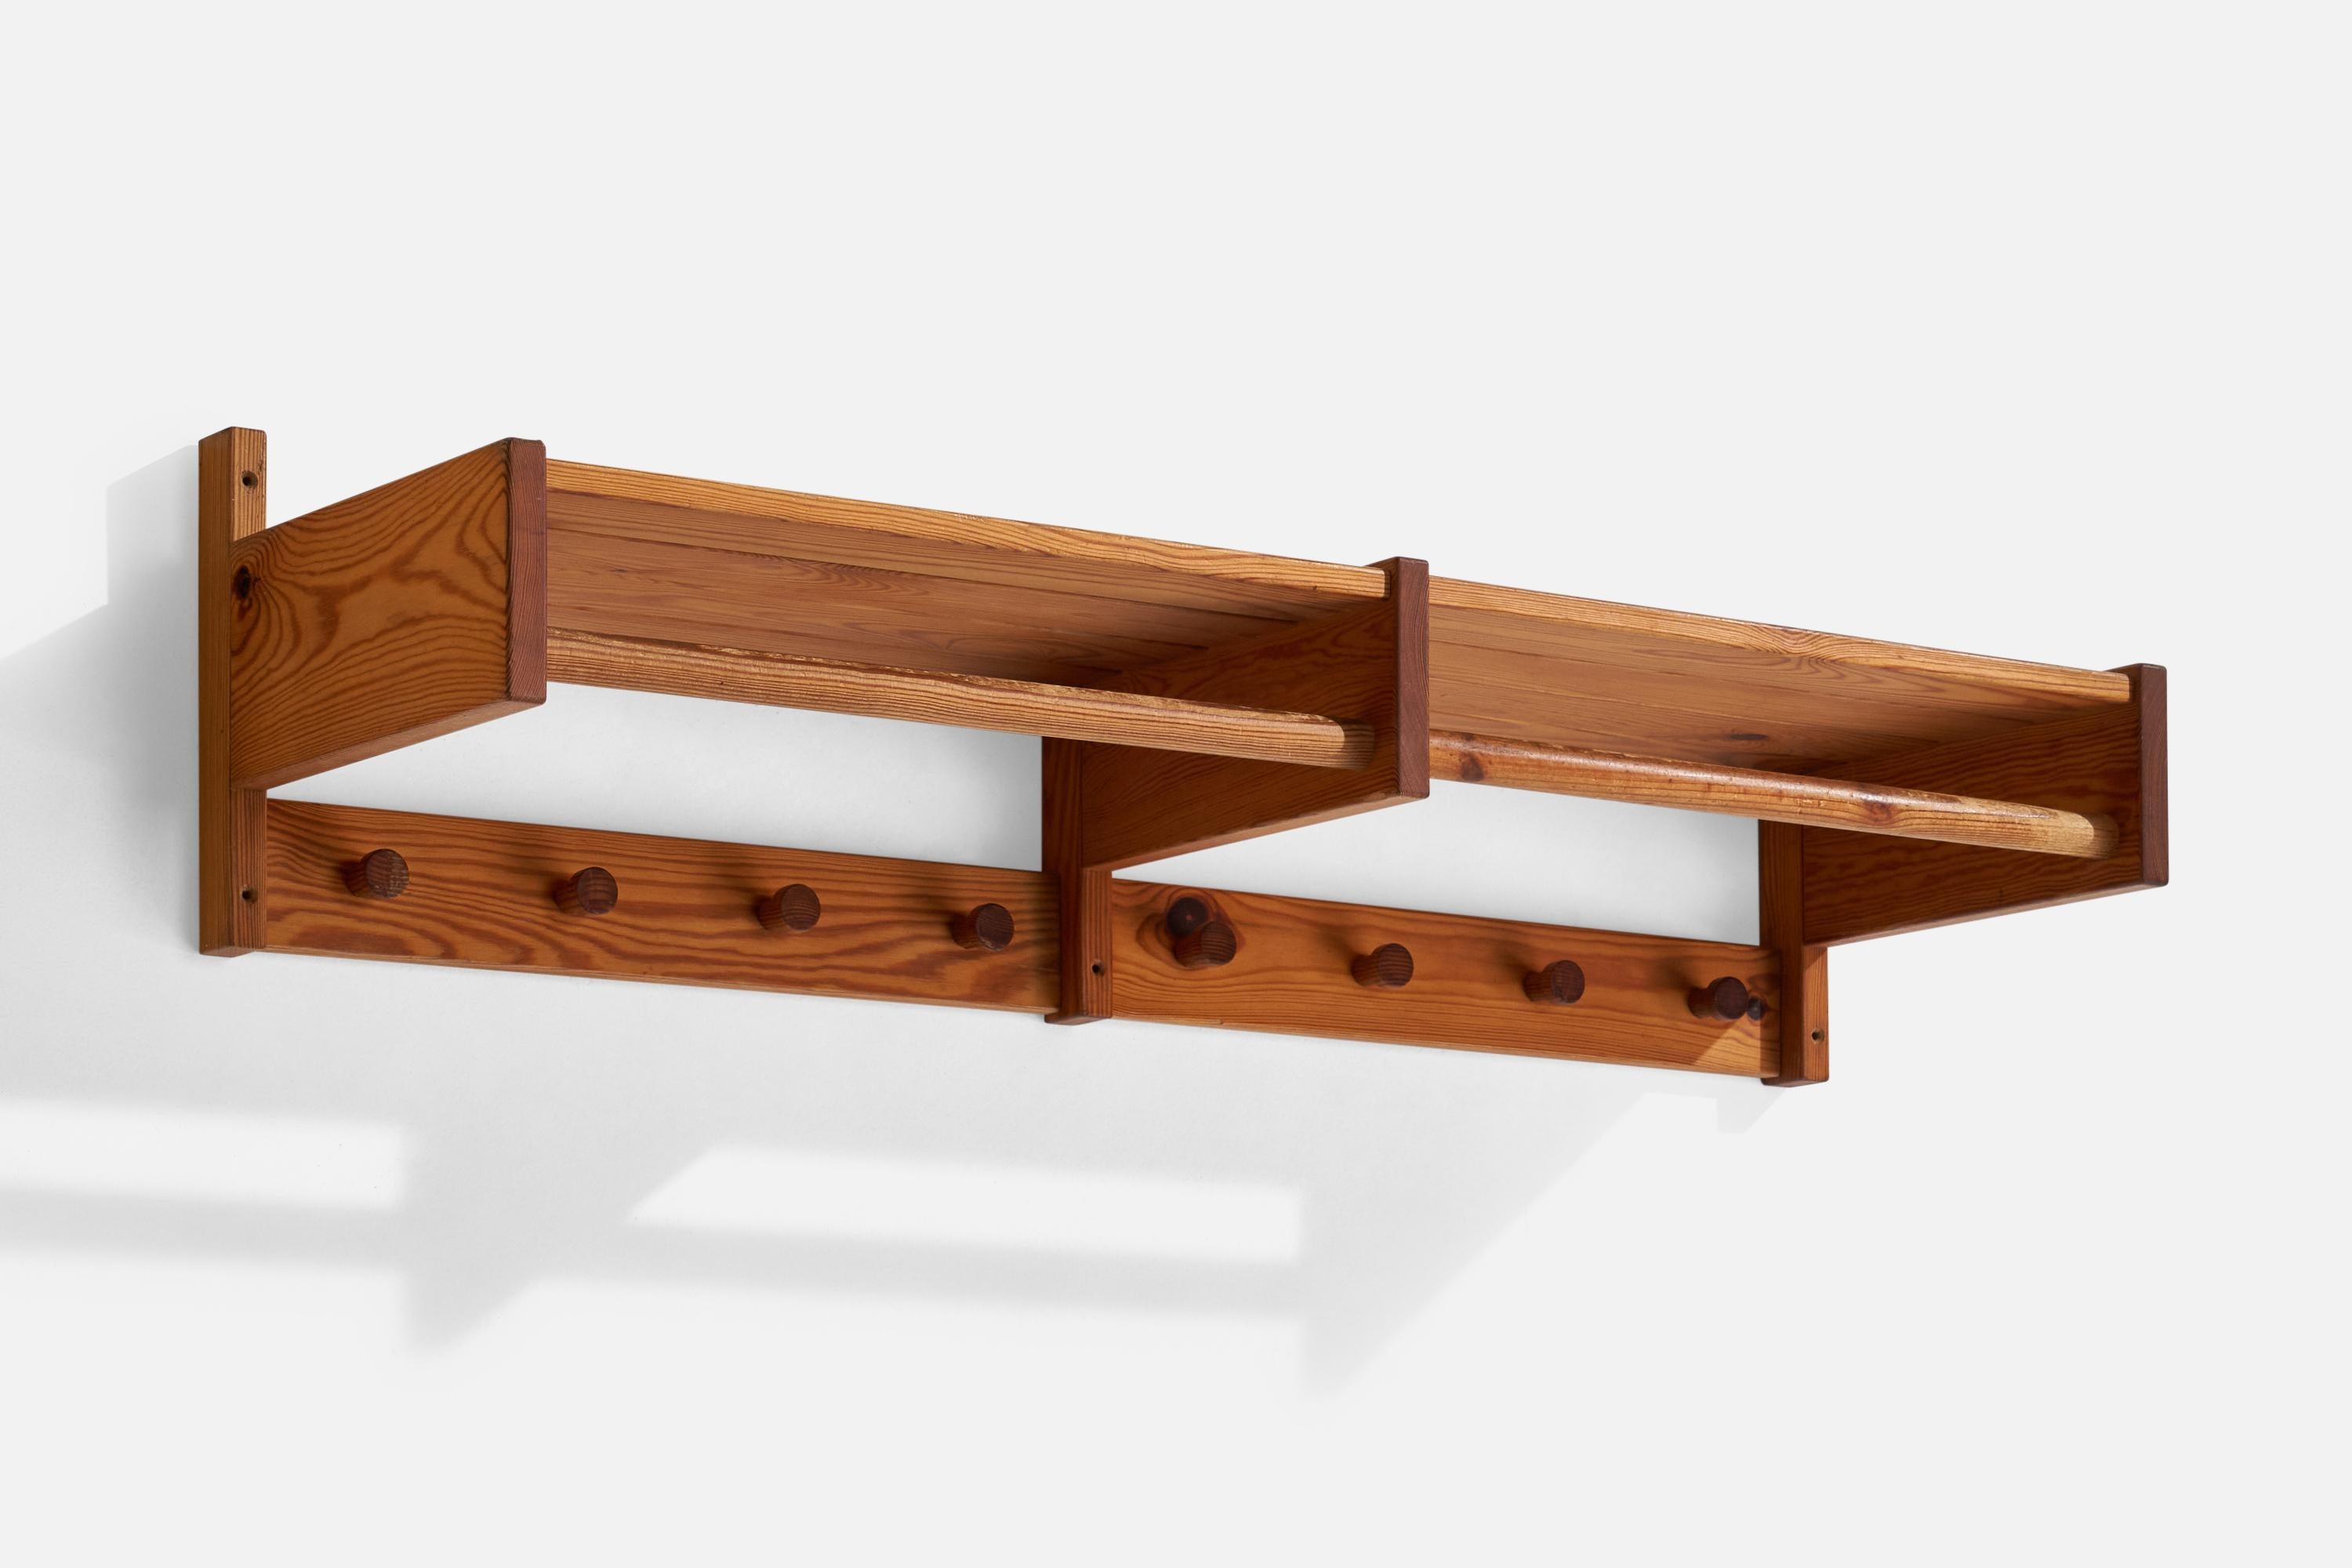 A pine coat rack designed and produced in Sweden, 1970s.